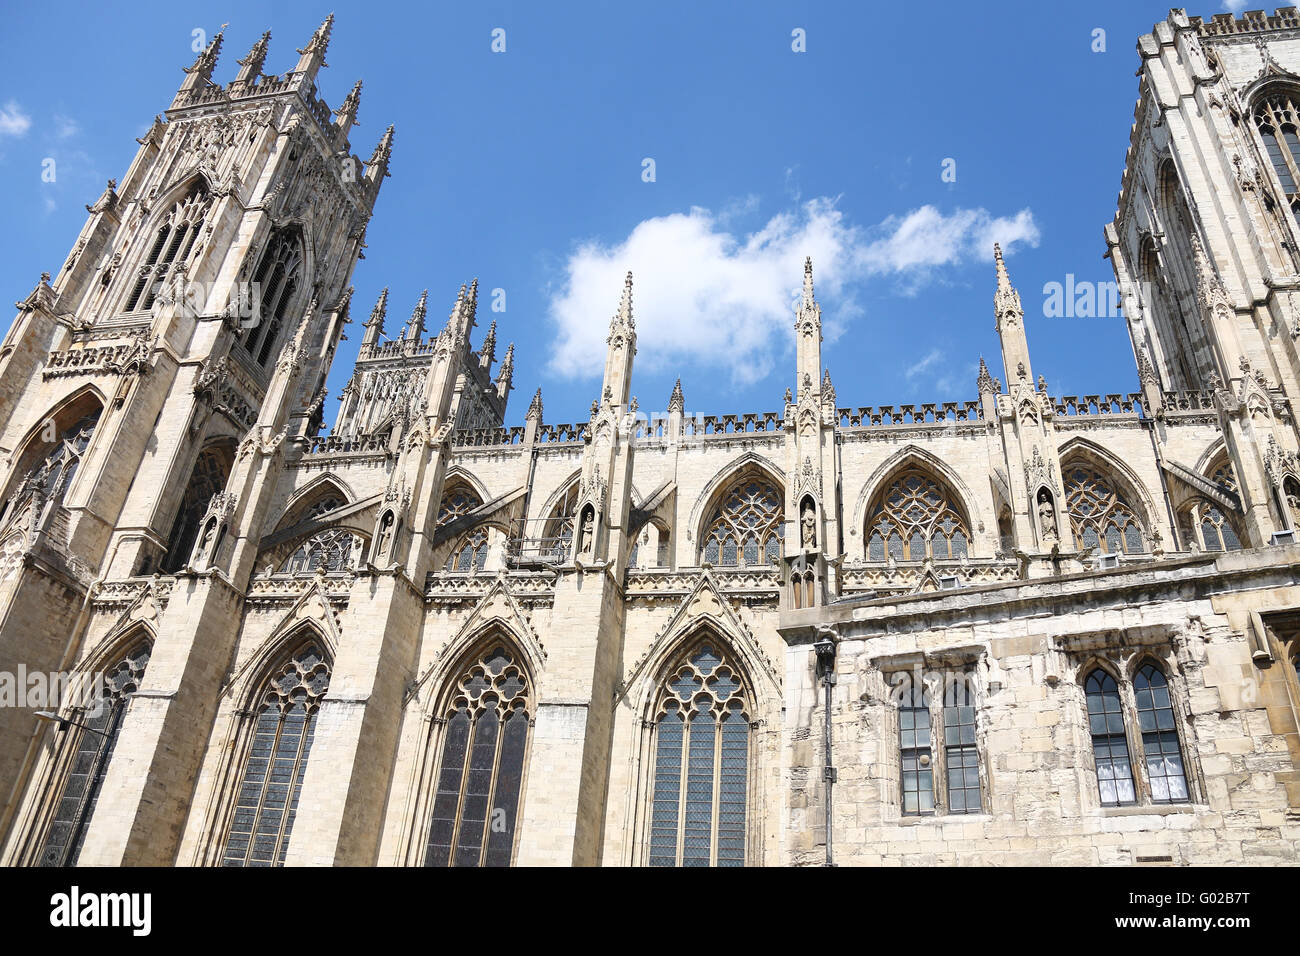 York Minster is a Gothic cathedral in York, England Stock Photo